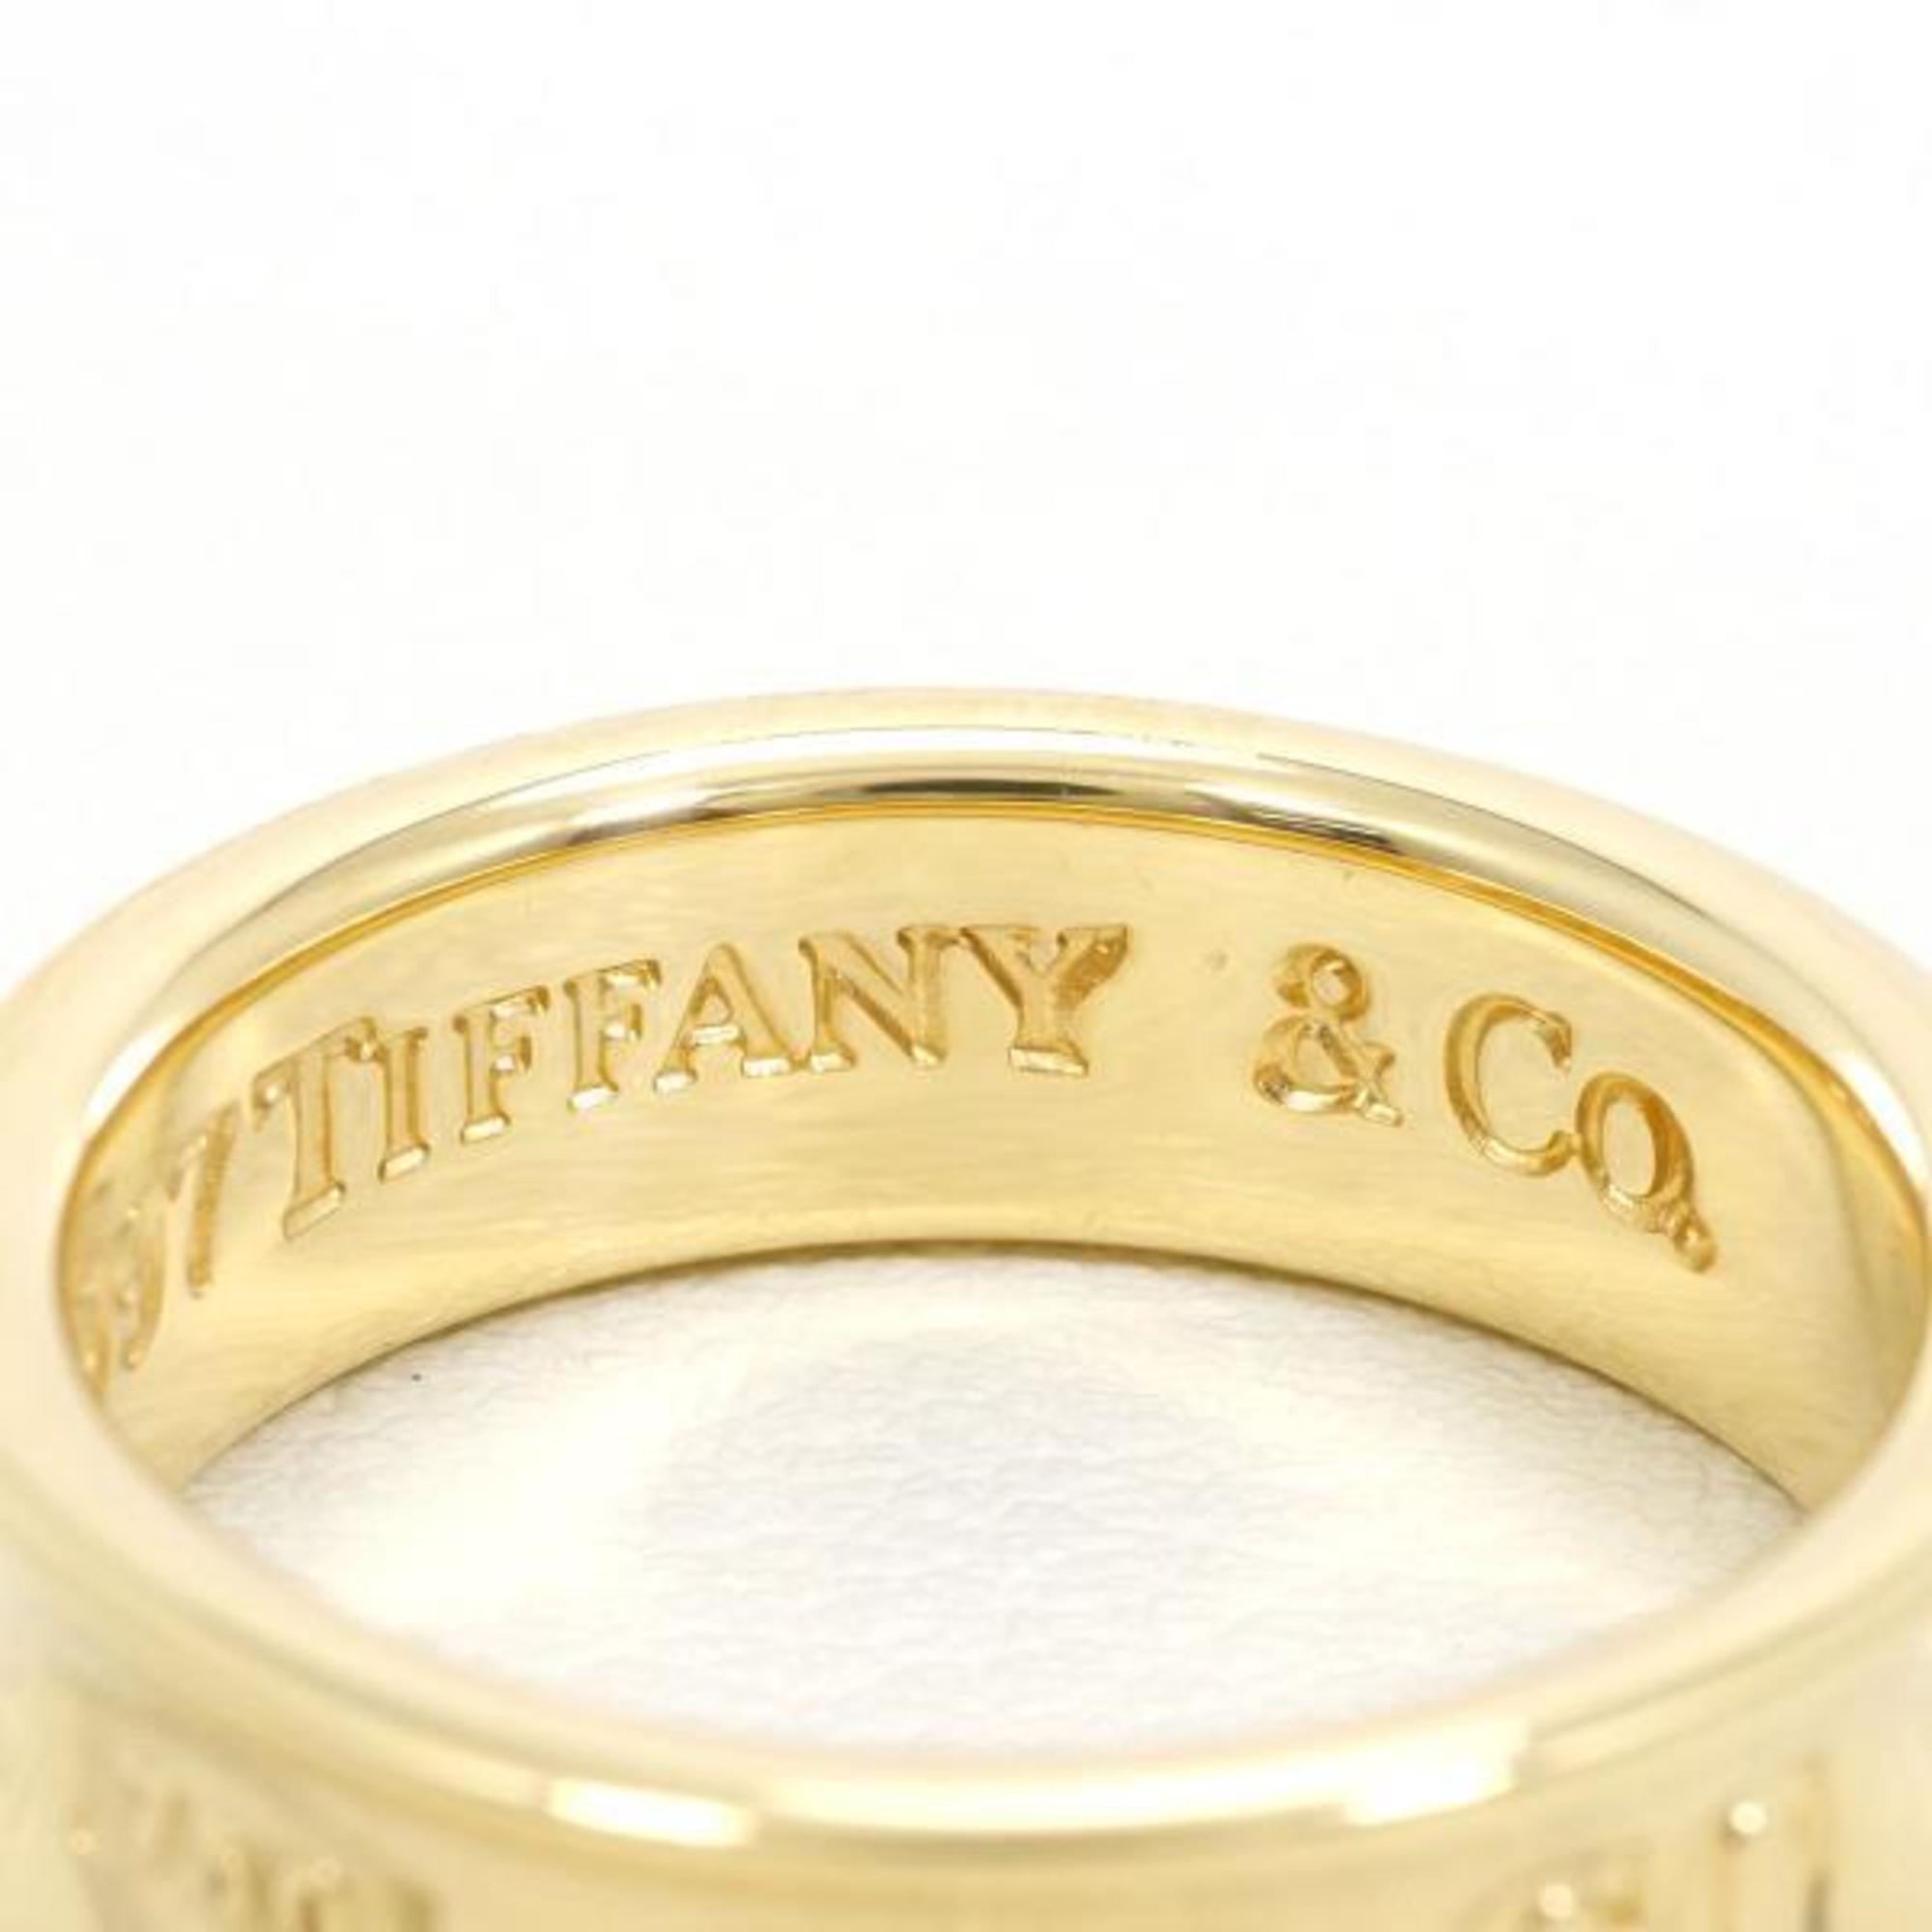 Tiffany 1837 Narrow K18YG Ring Total weight approx. 7.2g